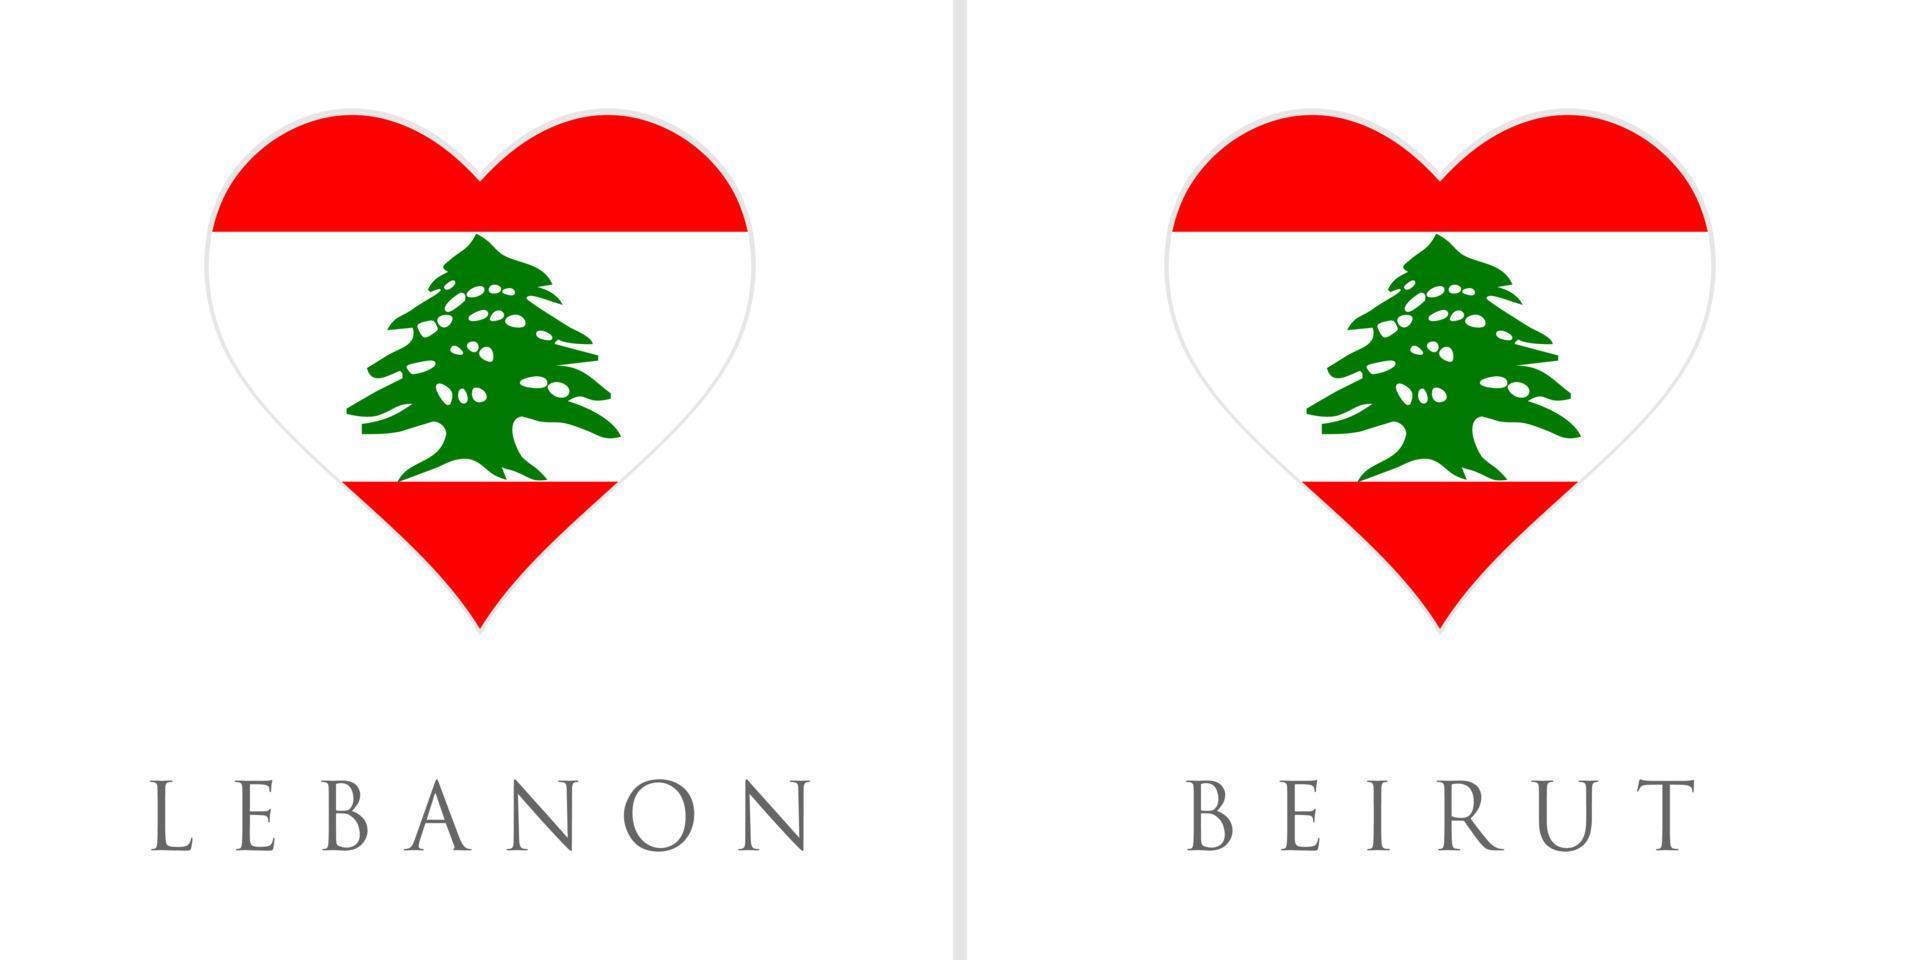 pray for lebanon and pray for beirut vector illustration. lebanon flag from massive explosion. design for humanity, peace, donations, charity and anti-war